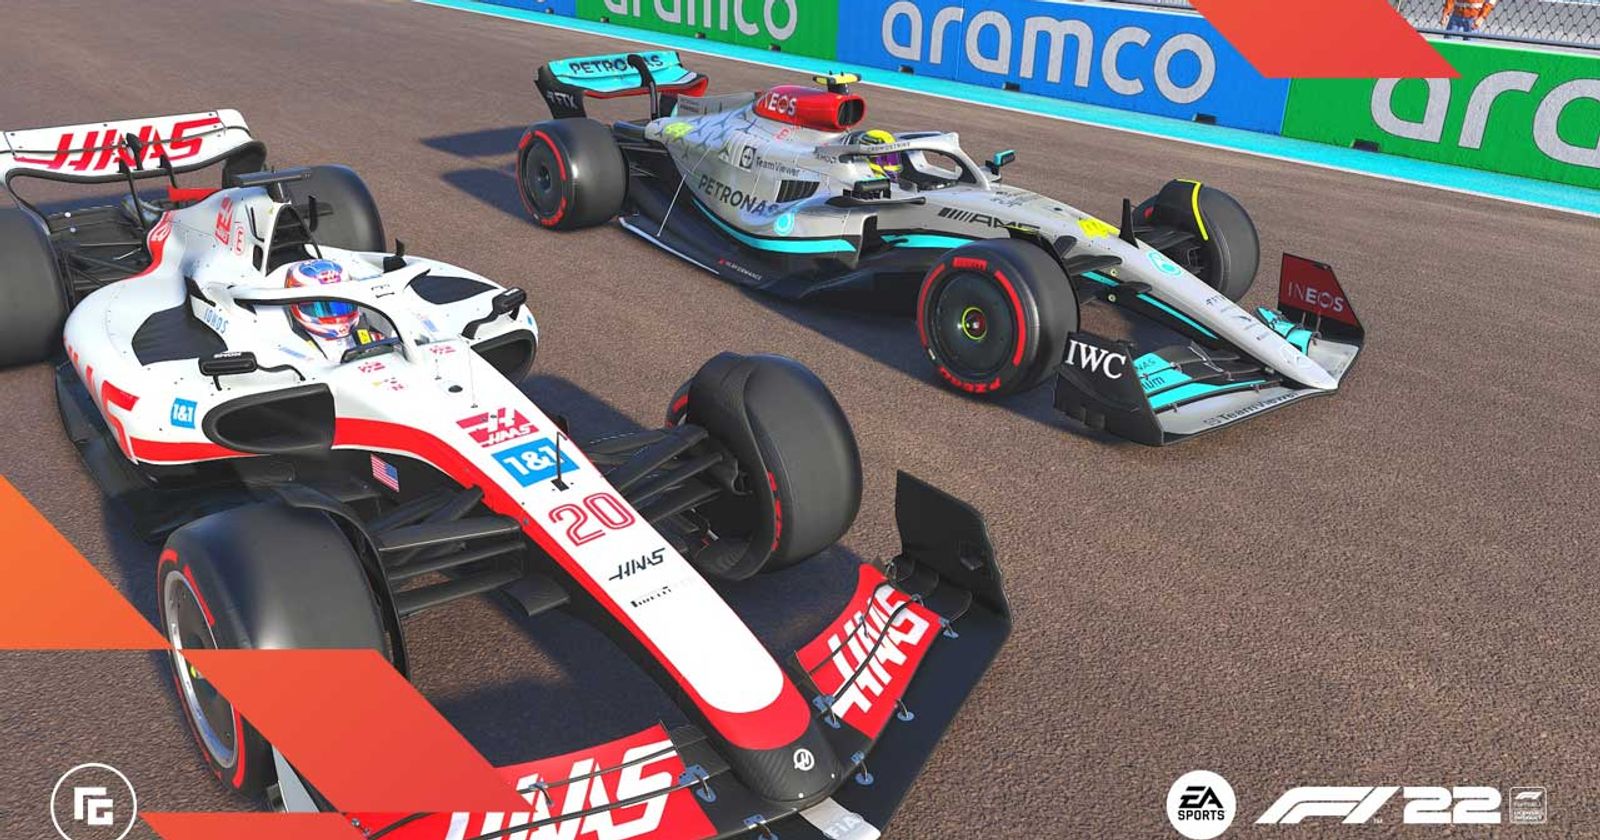 F1 22 game review: The new era of F1 games is here and it's more